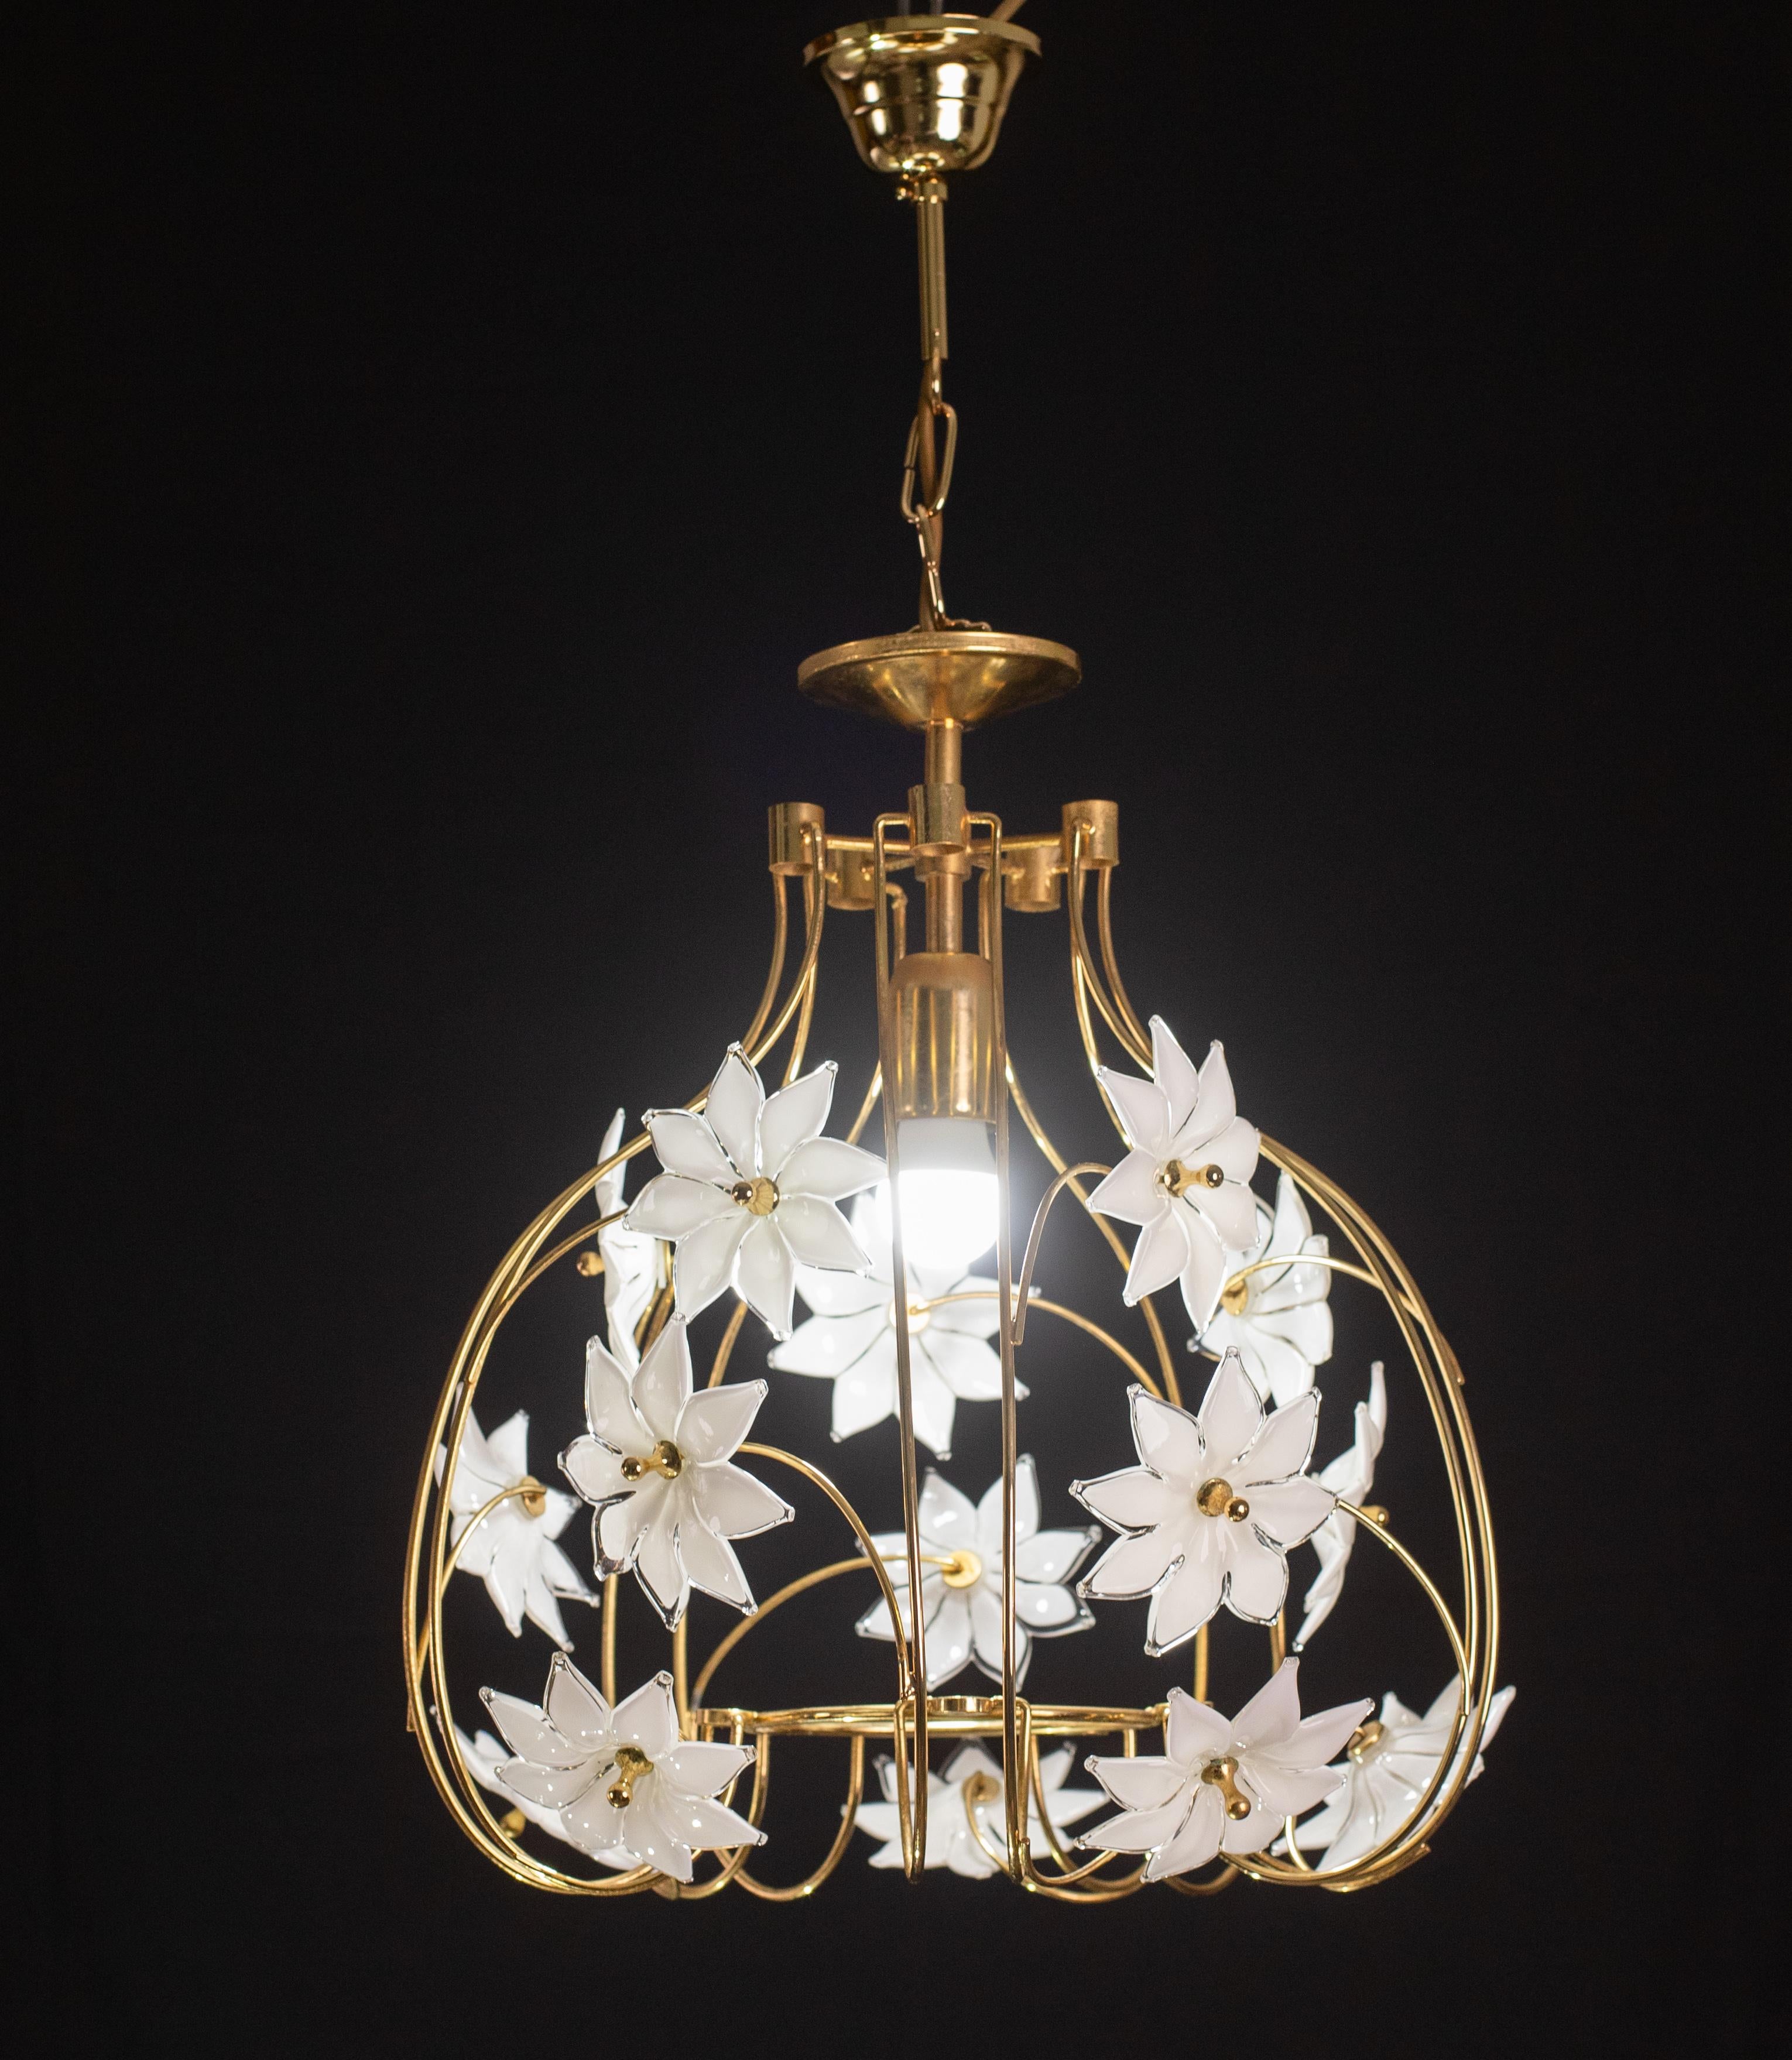 Vintage Murano glass chandelier with white flowers.
The chandelier has 1 light points with E27 connection, possible to rewire for USa.
The frame is in good vintage condition.
The height of the chandelier is 70 cm, 50 with no chain, the diameter is